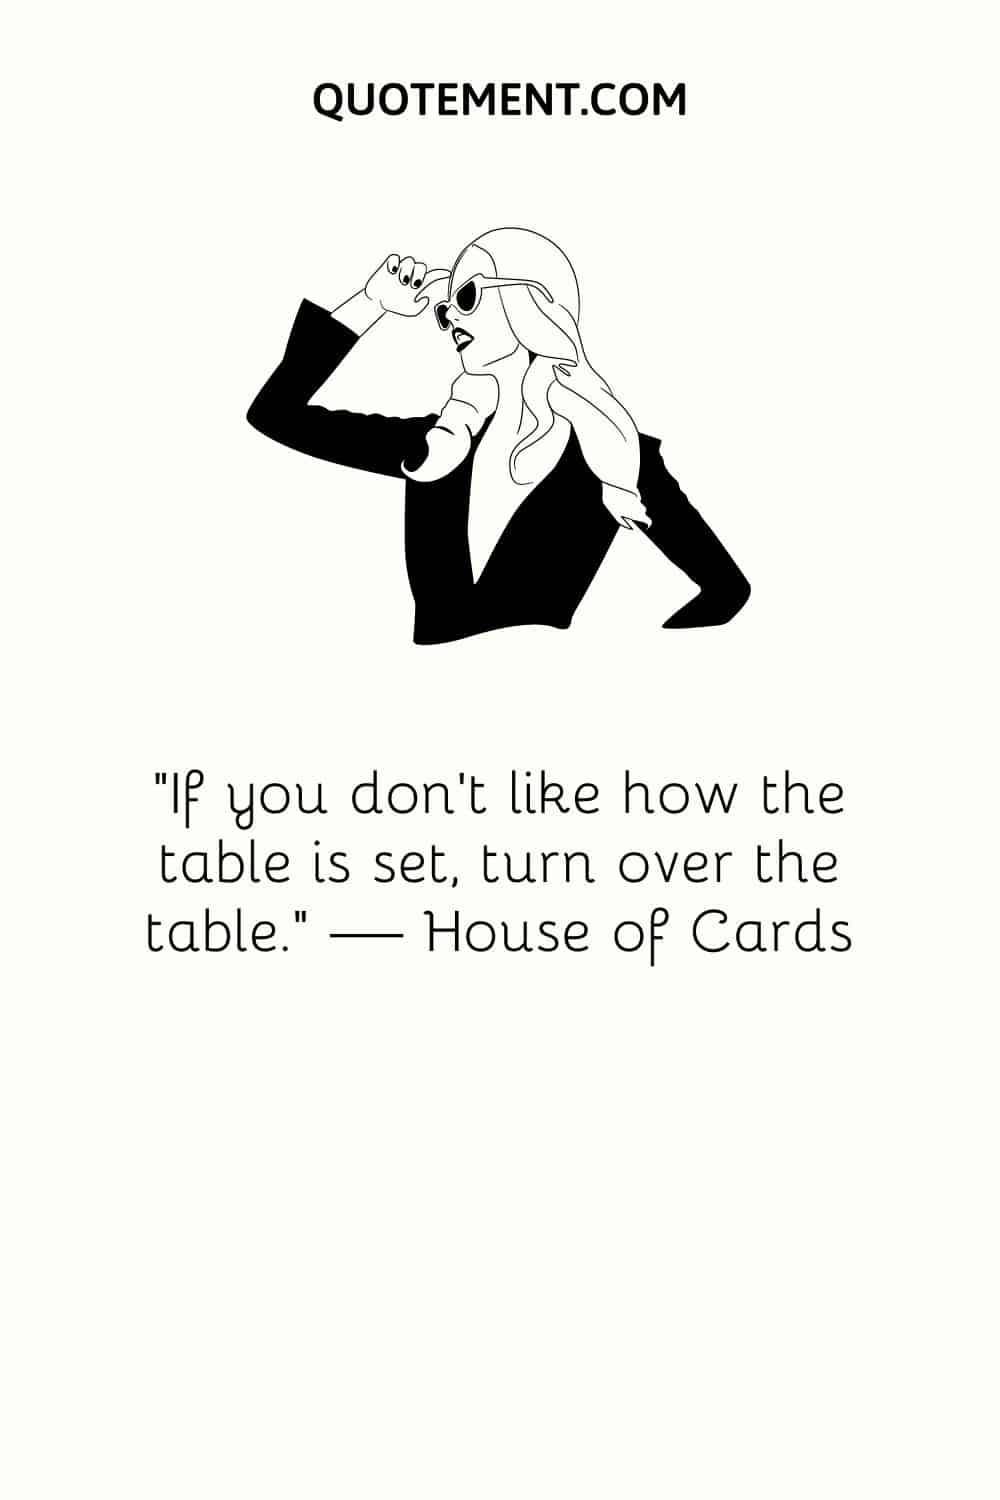 “If you don’t like how the table is set, turn over the table.” — House of Cards